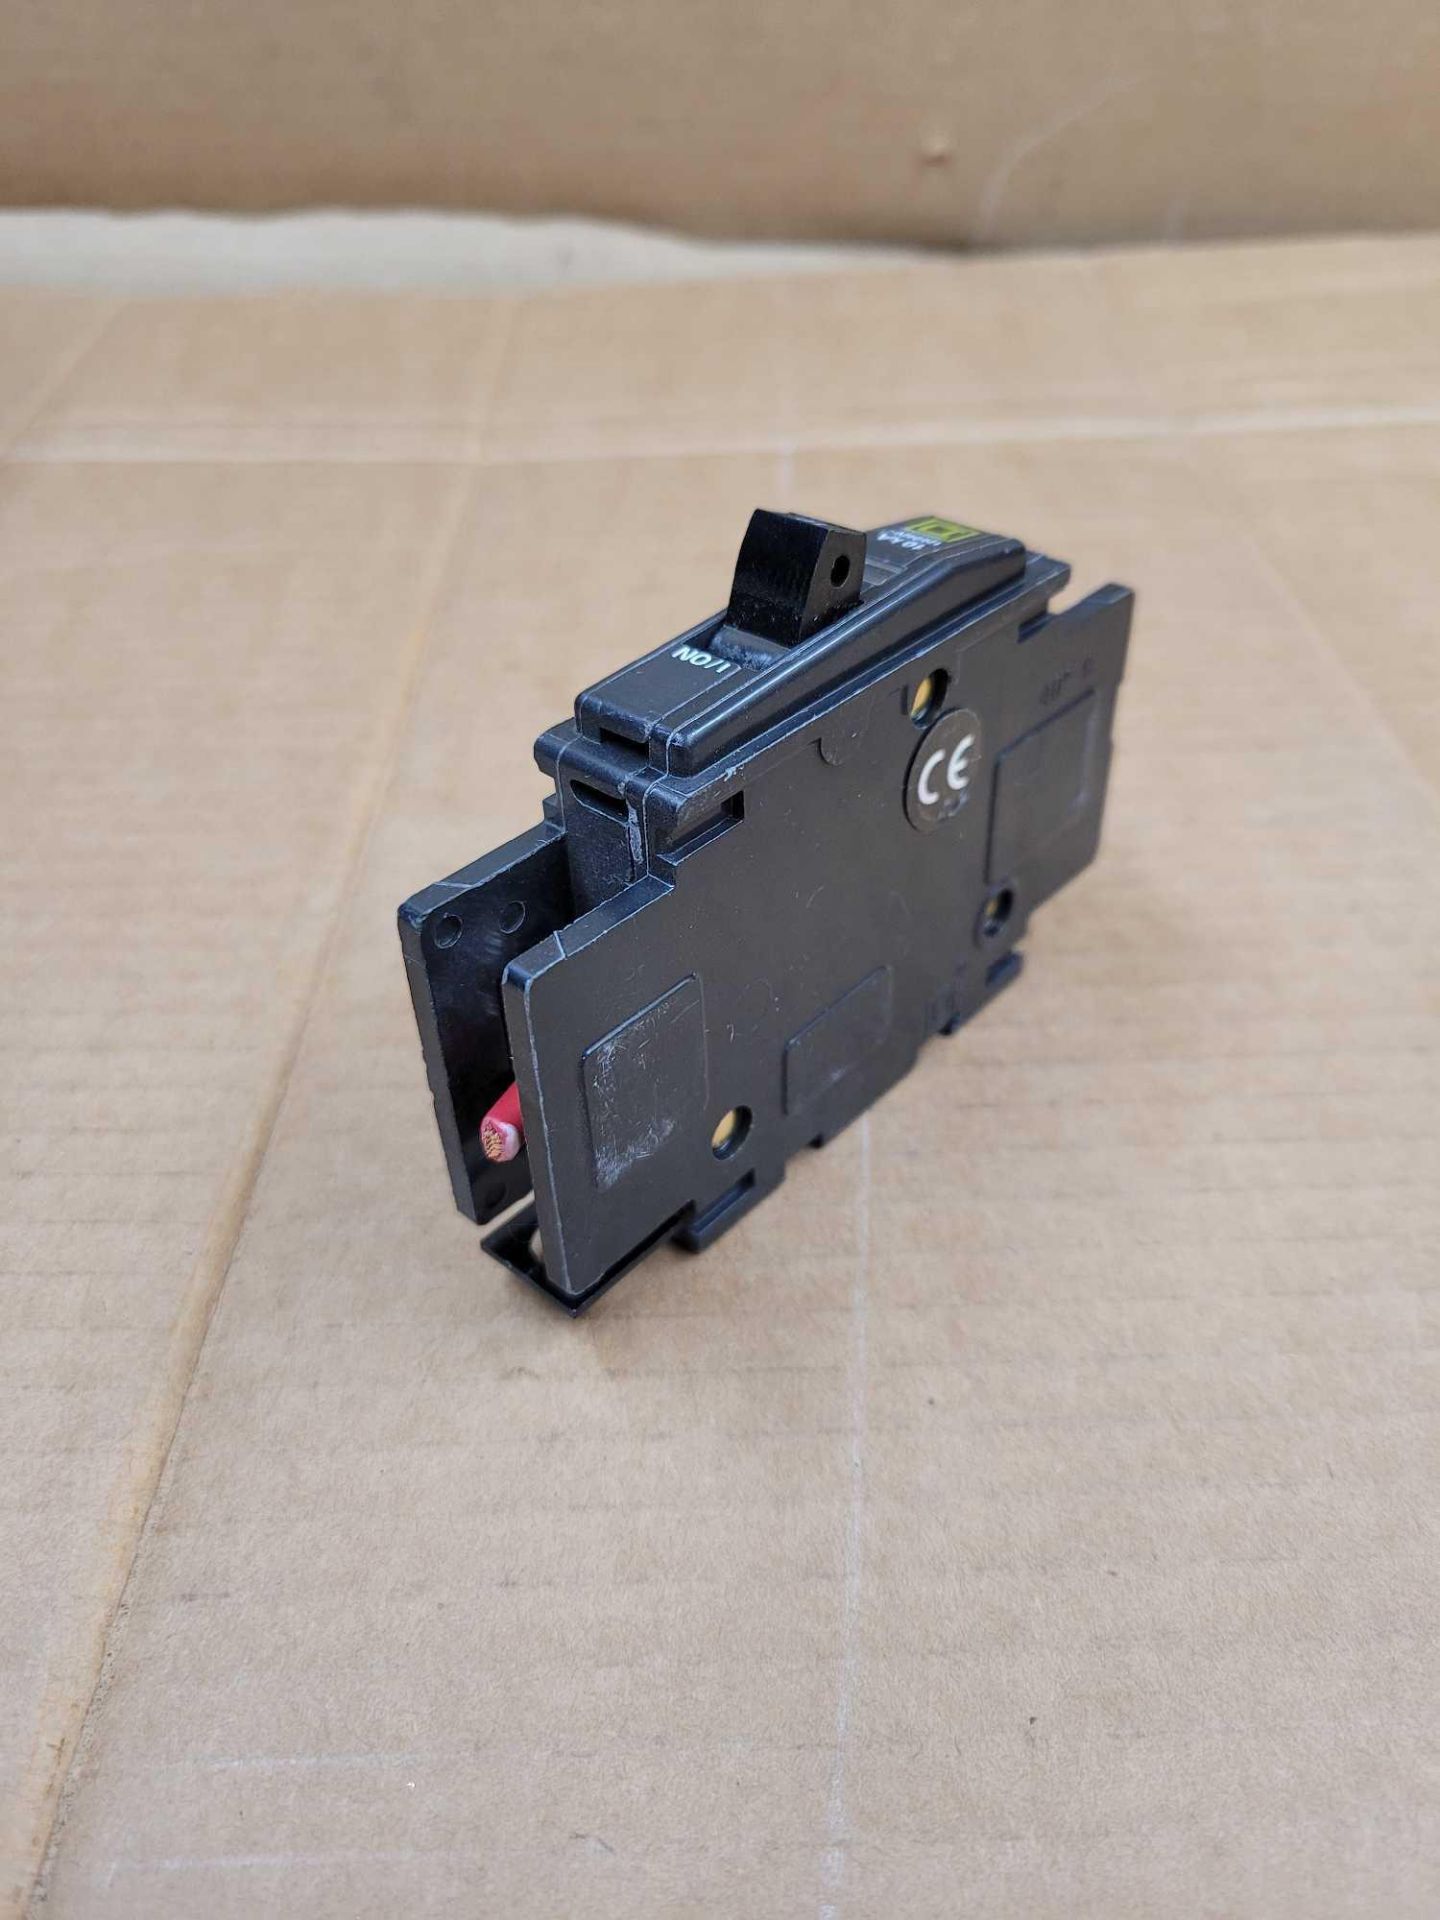 SQUARE D QOU110 / 10 Amp Circuit Breaker  /  Lot Weight: 11.2 lbs - Image 4 of 6